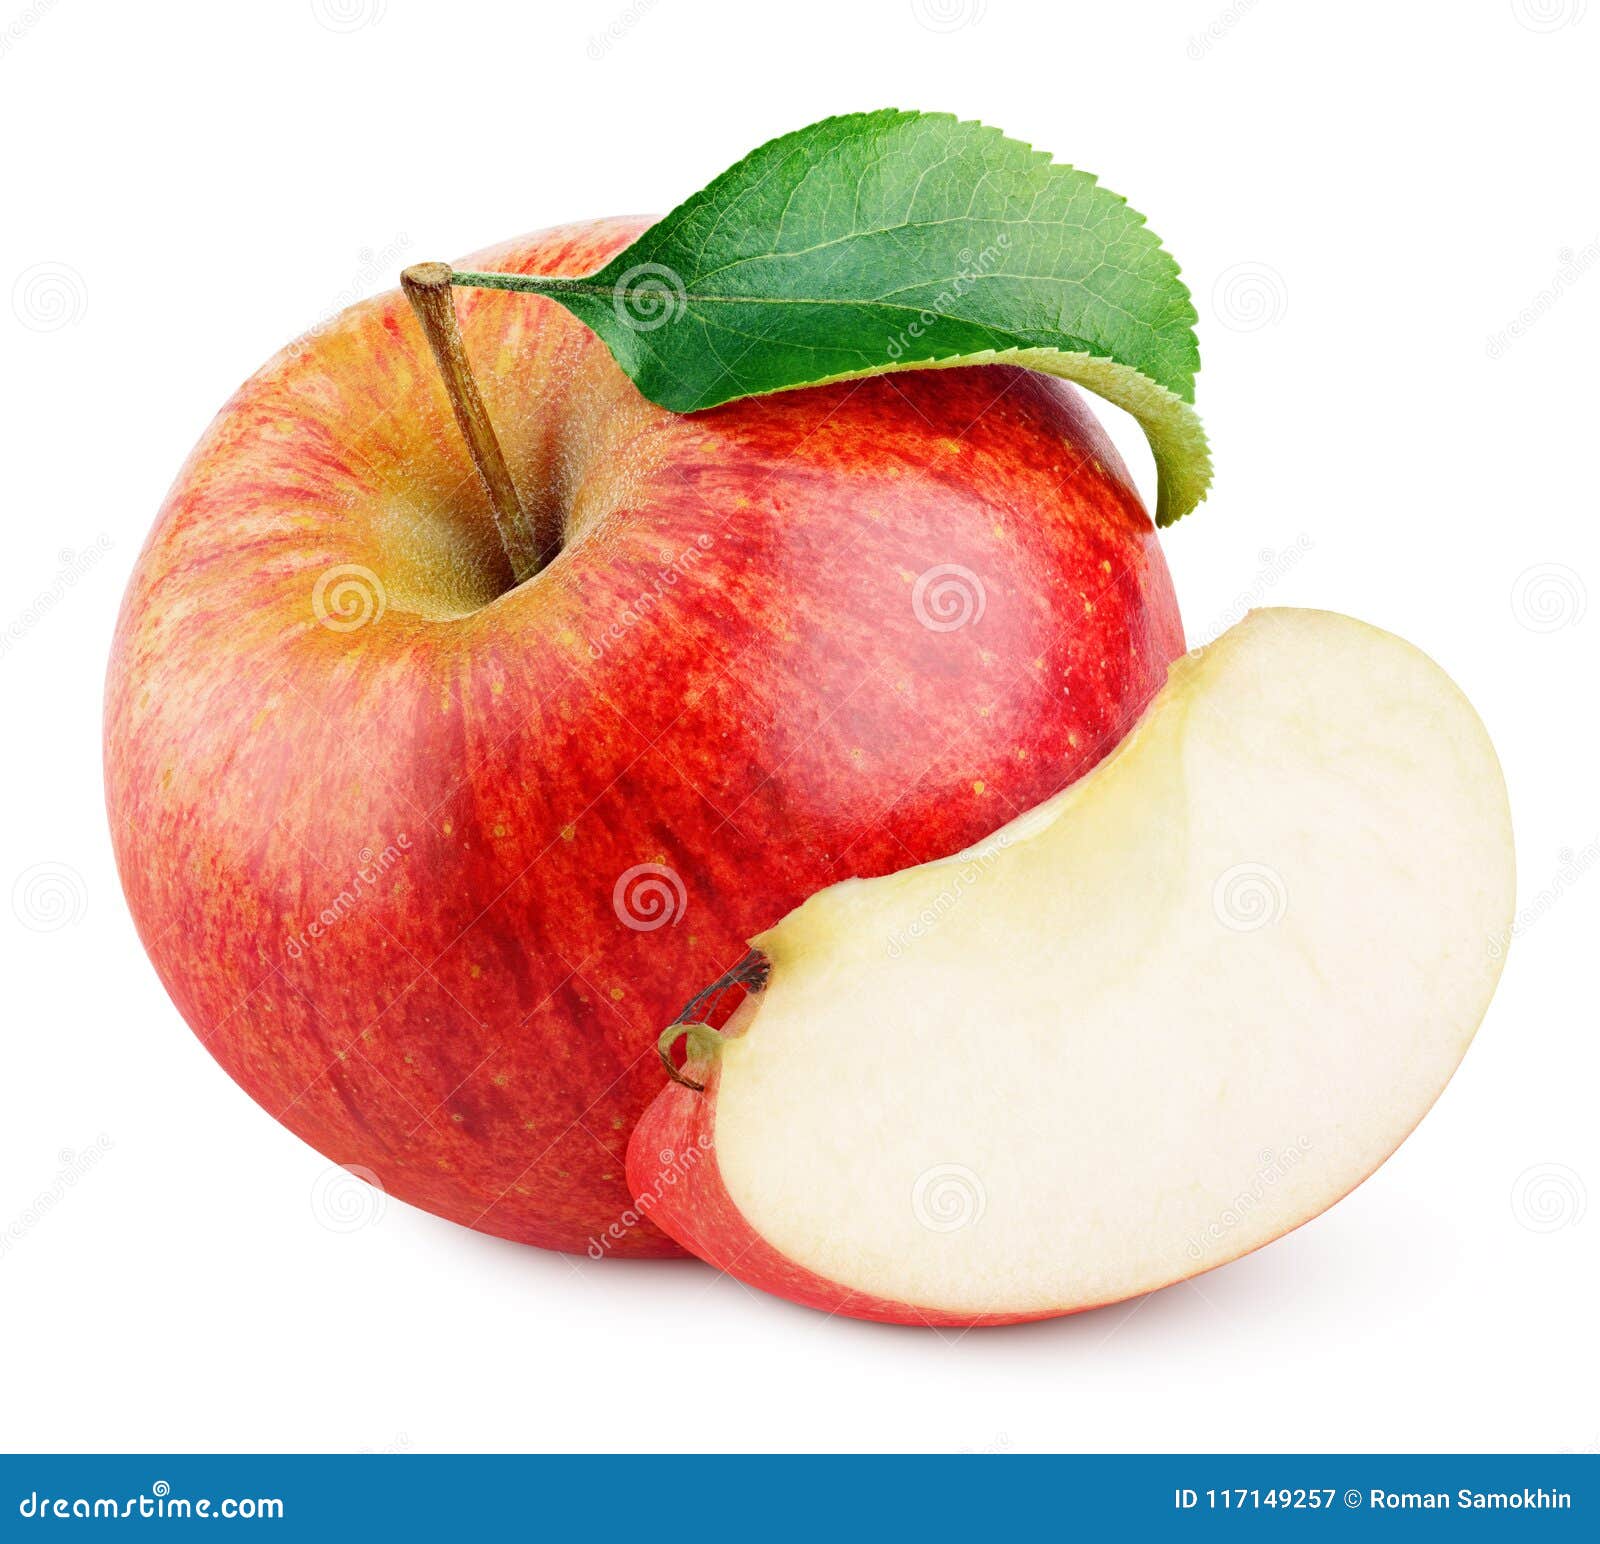 https://thumbs.dreamstime.com/z/ripe-red-apple-fruit-apple-slice-seed-green-leaf-isolated-white-background-clipping-path-red-apple-fruit-117149257.jpg